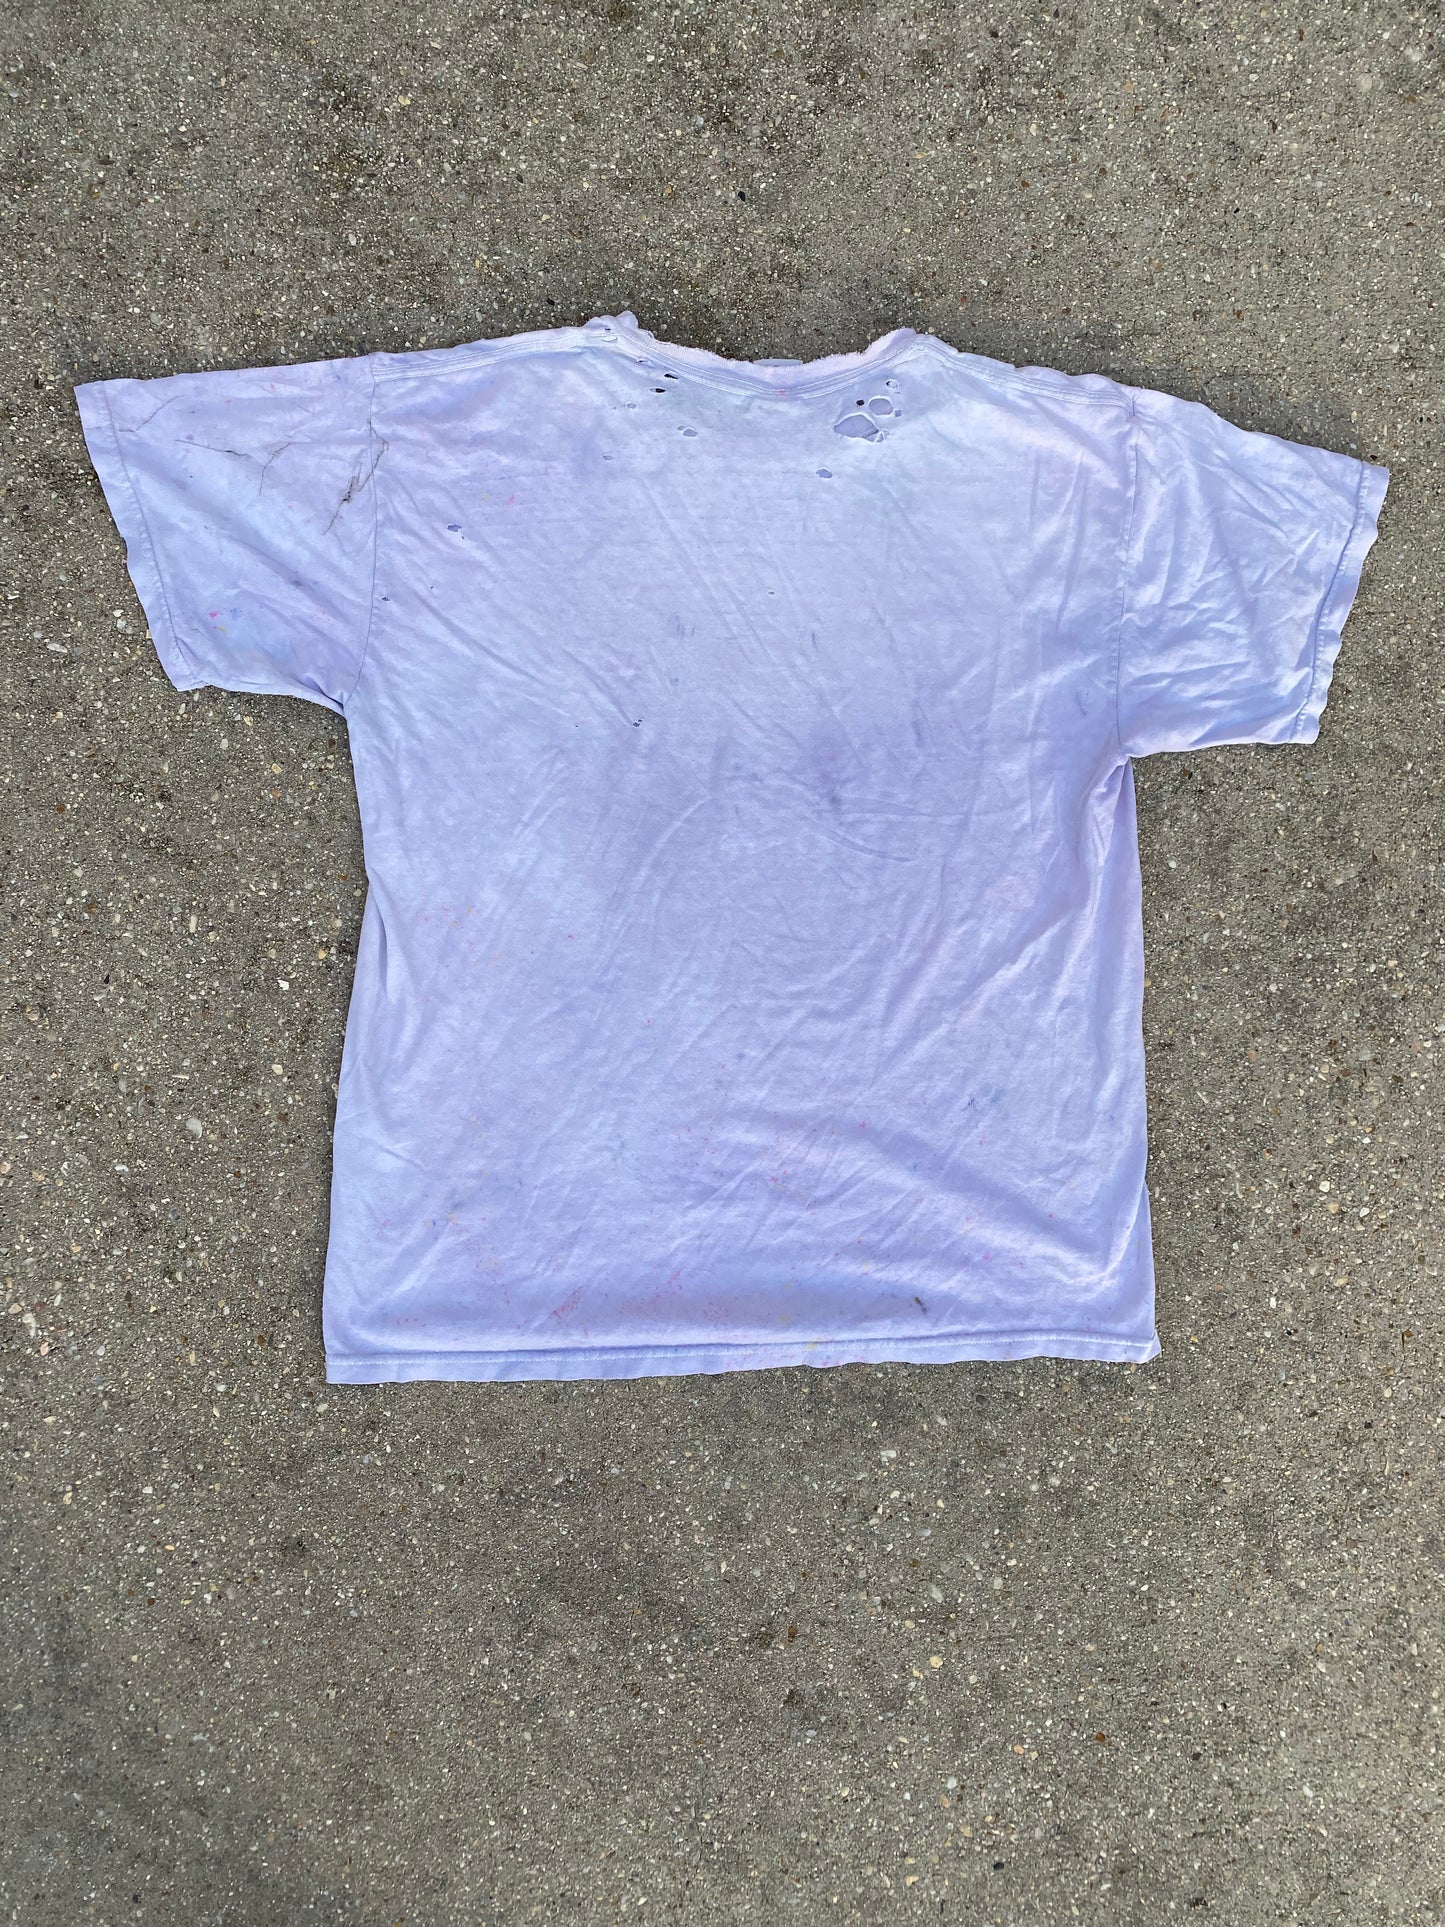 Bear Claw Dyed Vintage Tee - Brimm Archive Wardrobe Research